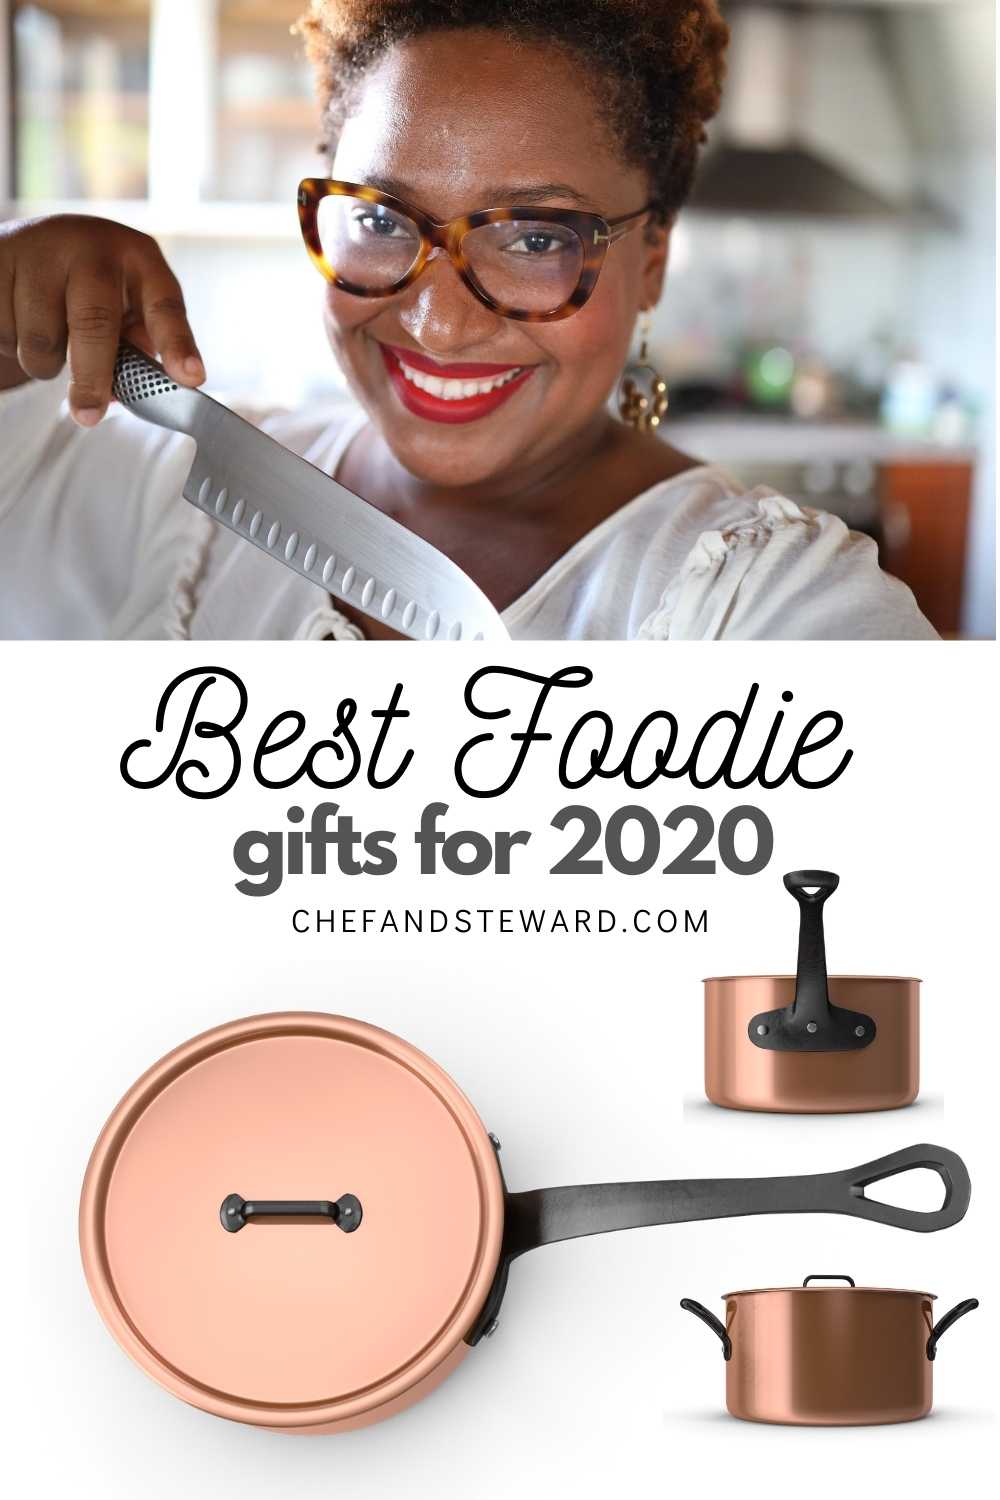 Best Foodie gifts for 2020